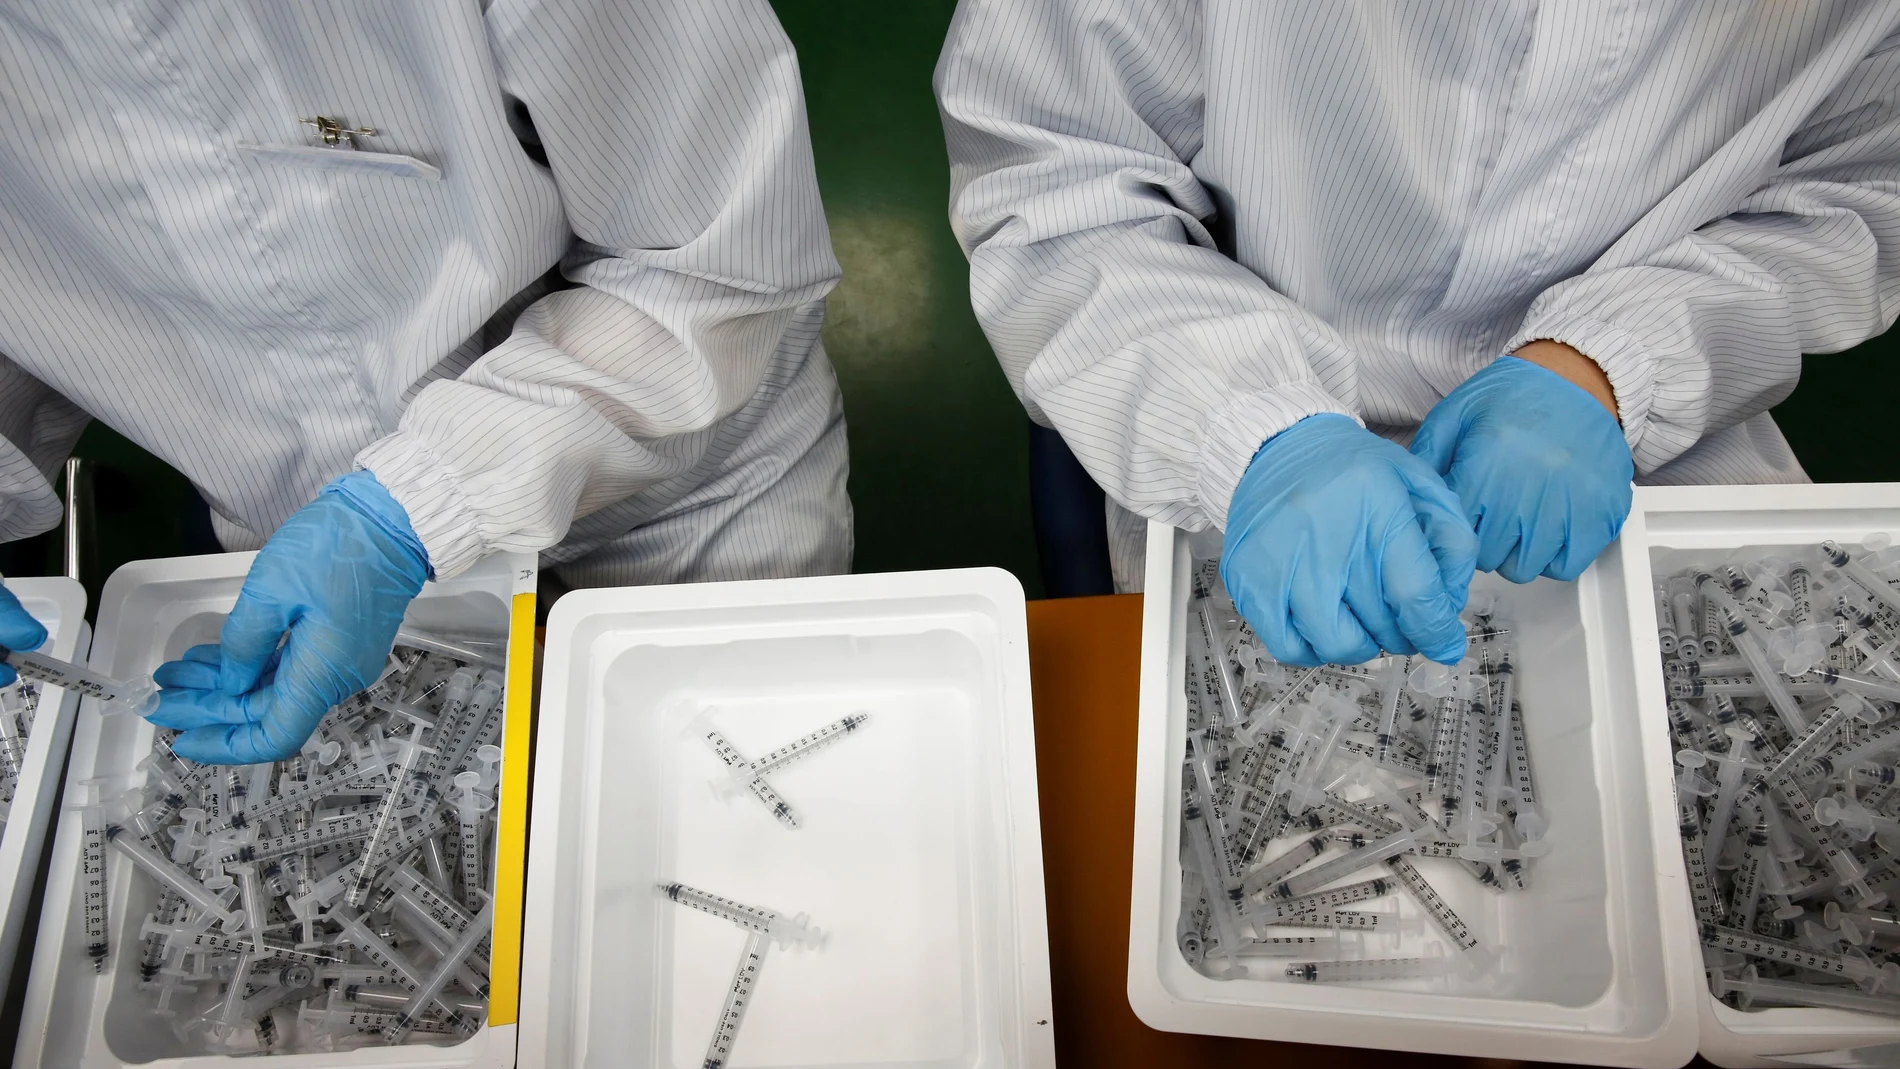 Employees work at a low dead space (LDS) syringe factory in Gunsan, South Korea, April 5, 2021. Picture taken April 5, 2021. REUTERS/Heo Ran